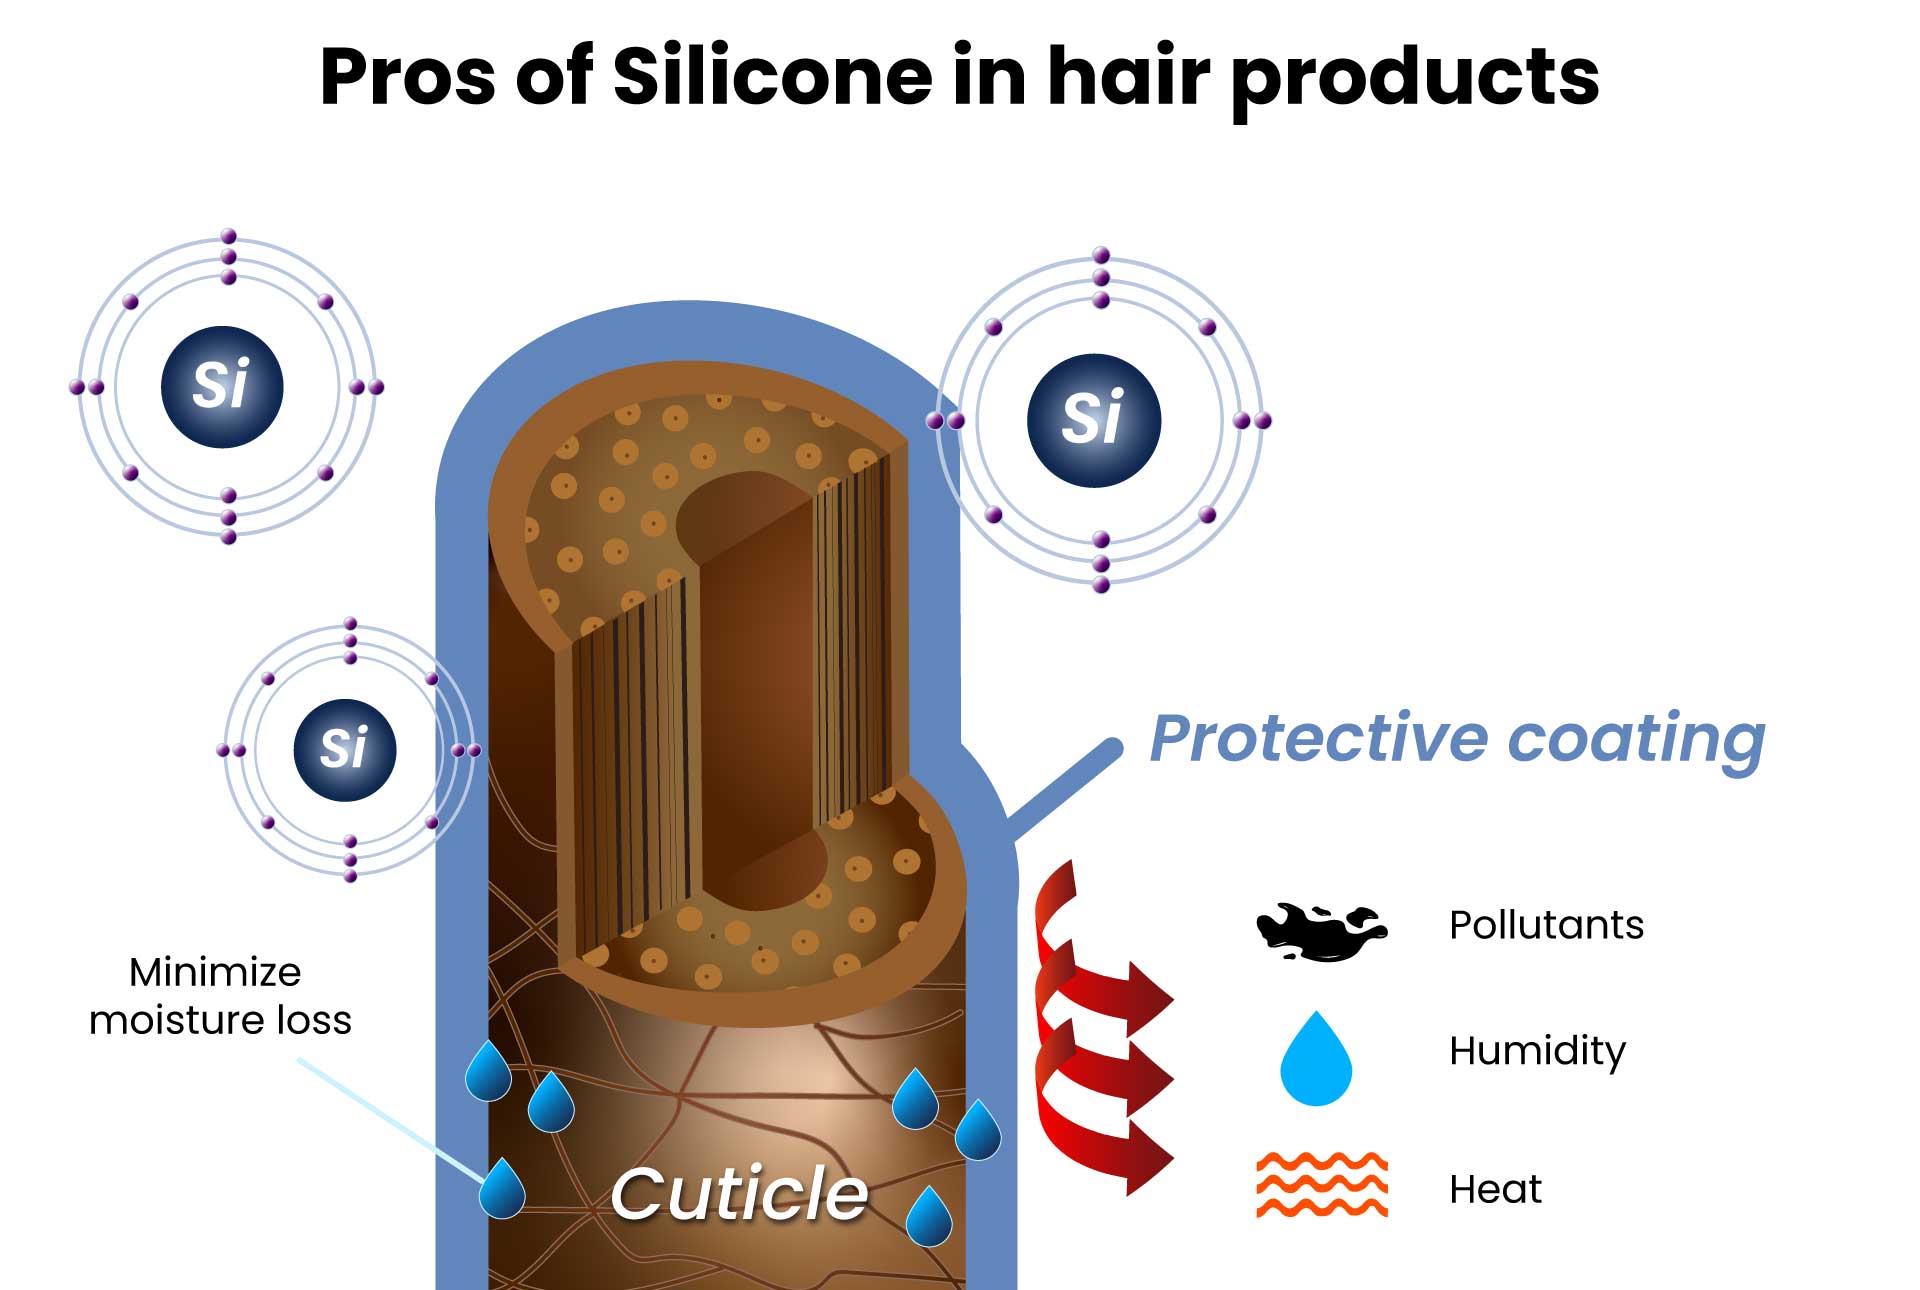 Silicone in hair products